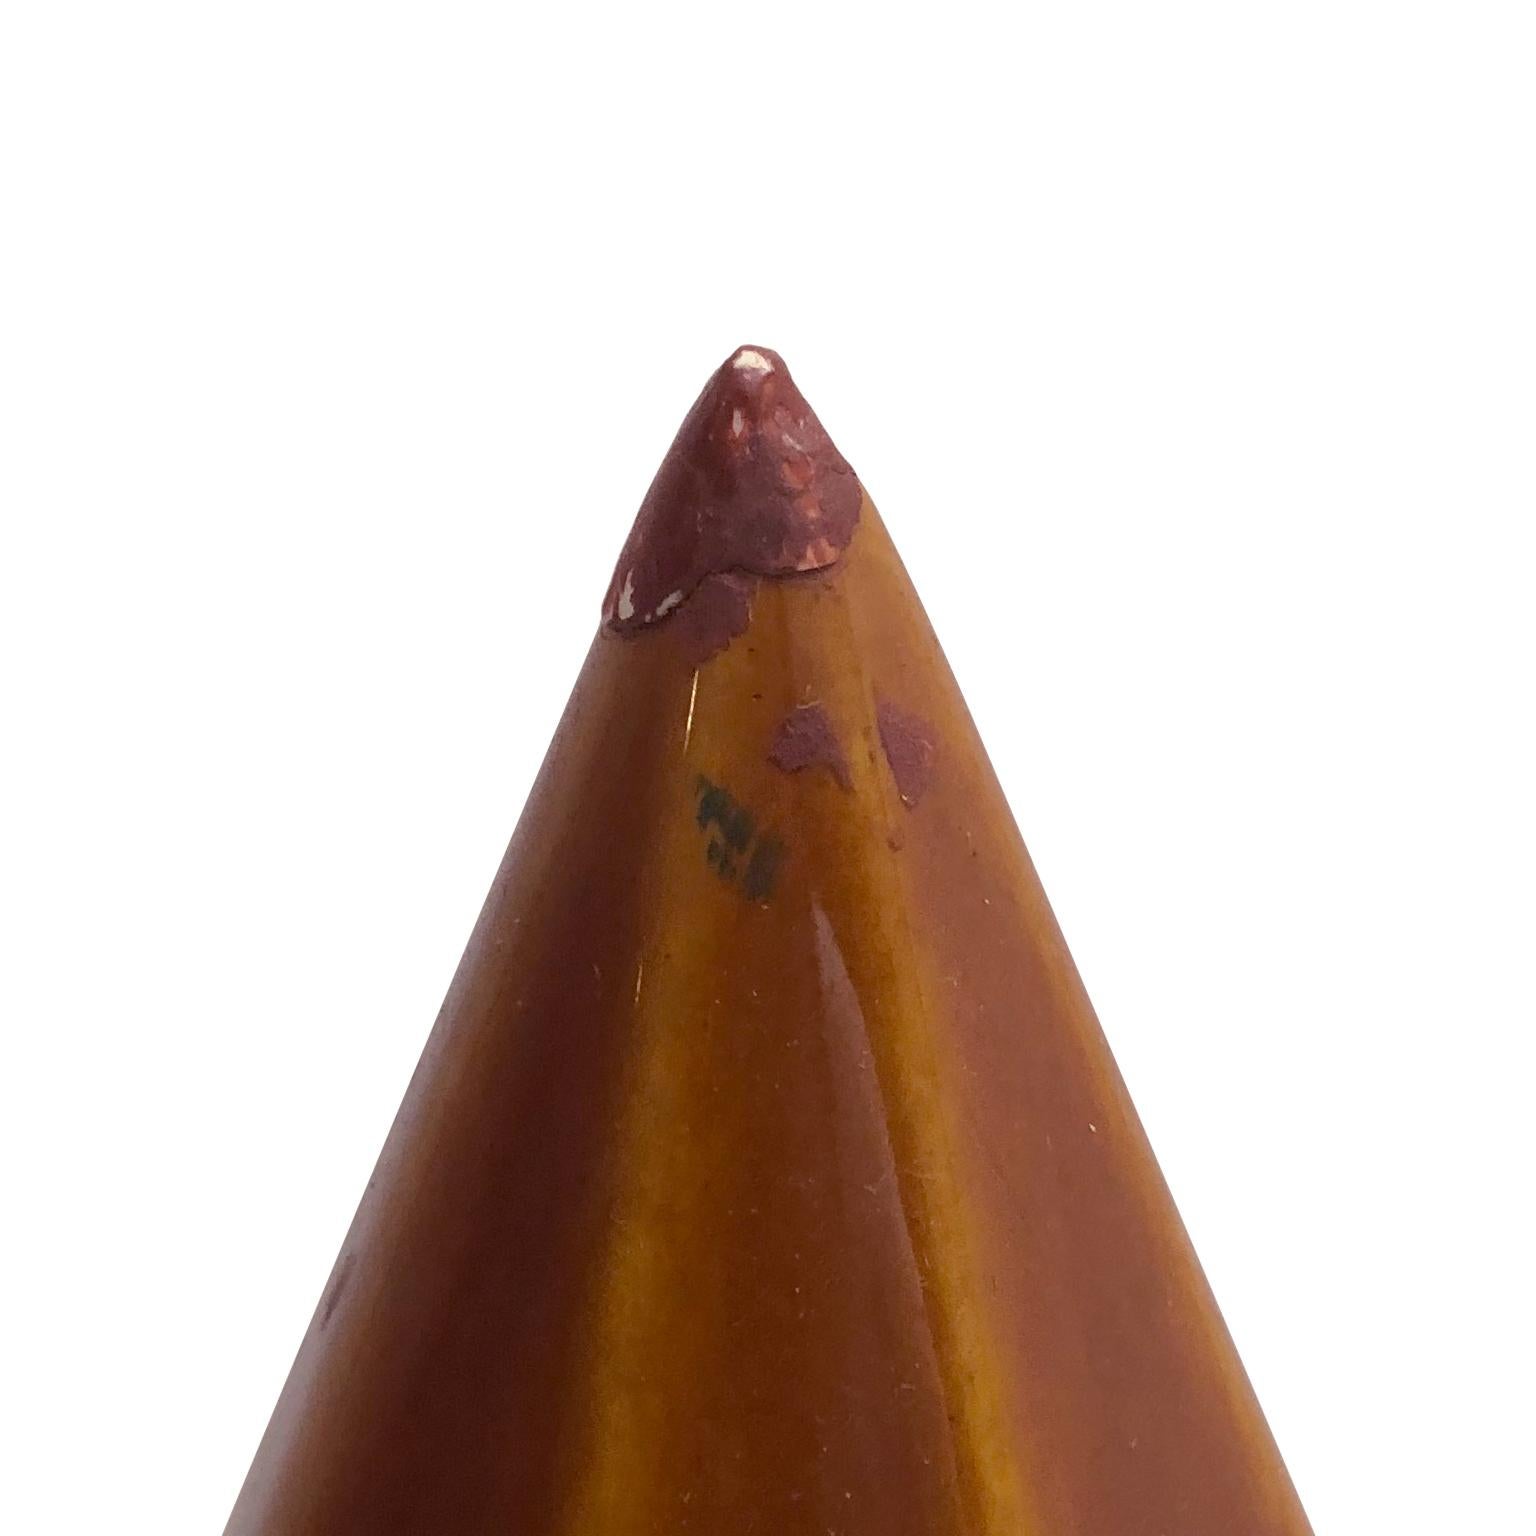 Modernist ceramic pyramid with auburn glaze. Initialled and dated on bottom, USA, 1965.

  